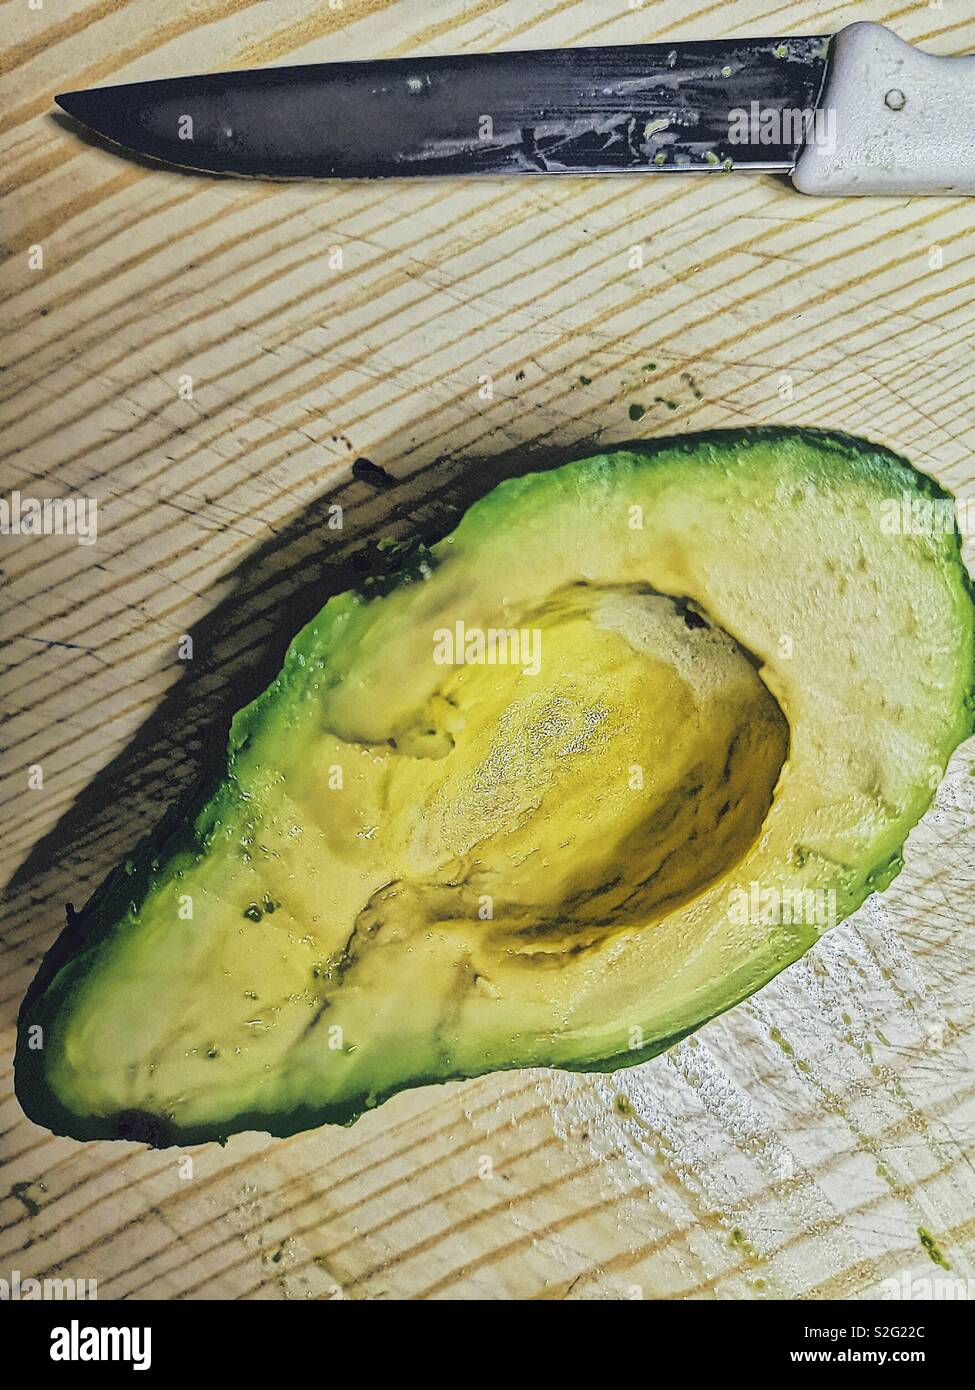 High angle shot of half an avocado on chopping board with knife Stock Photo